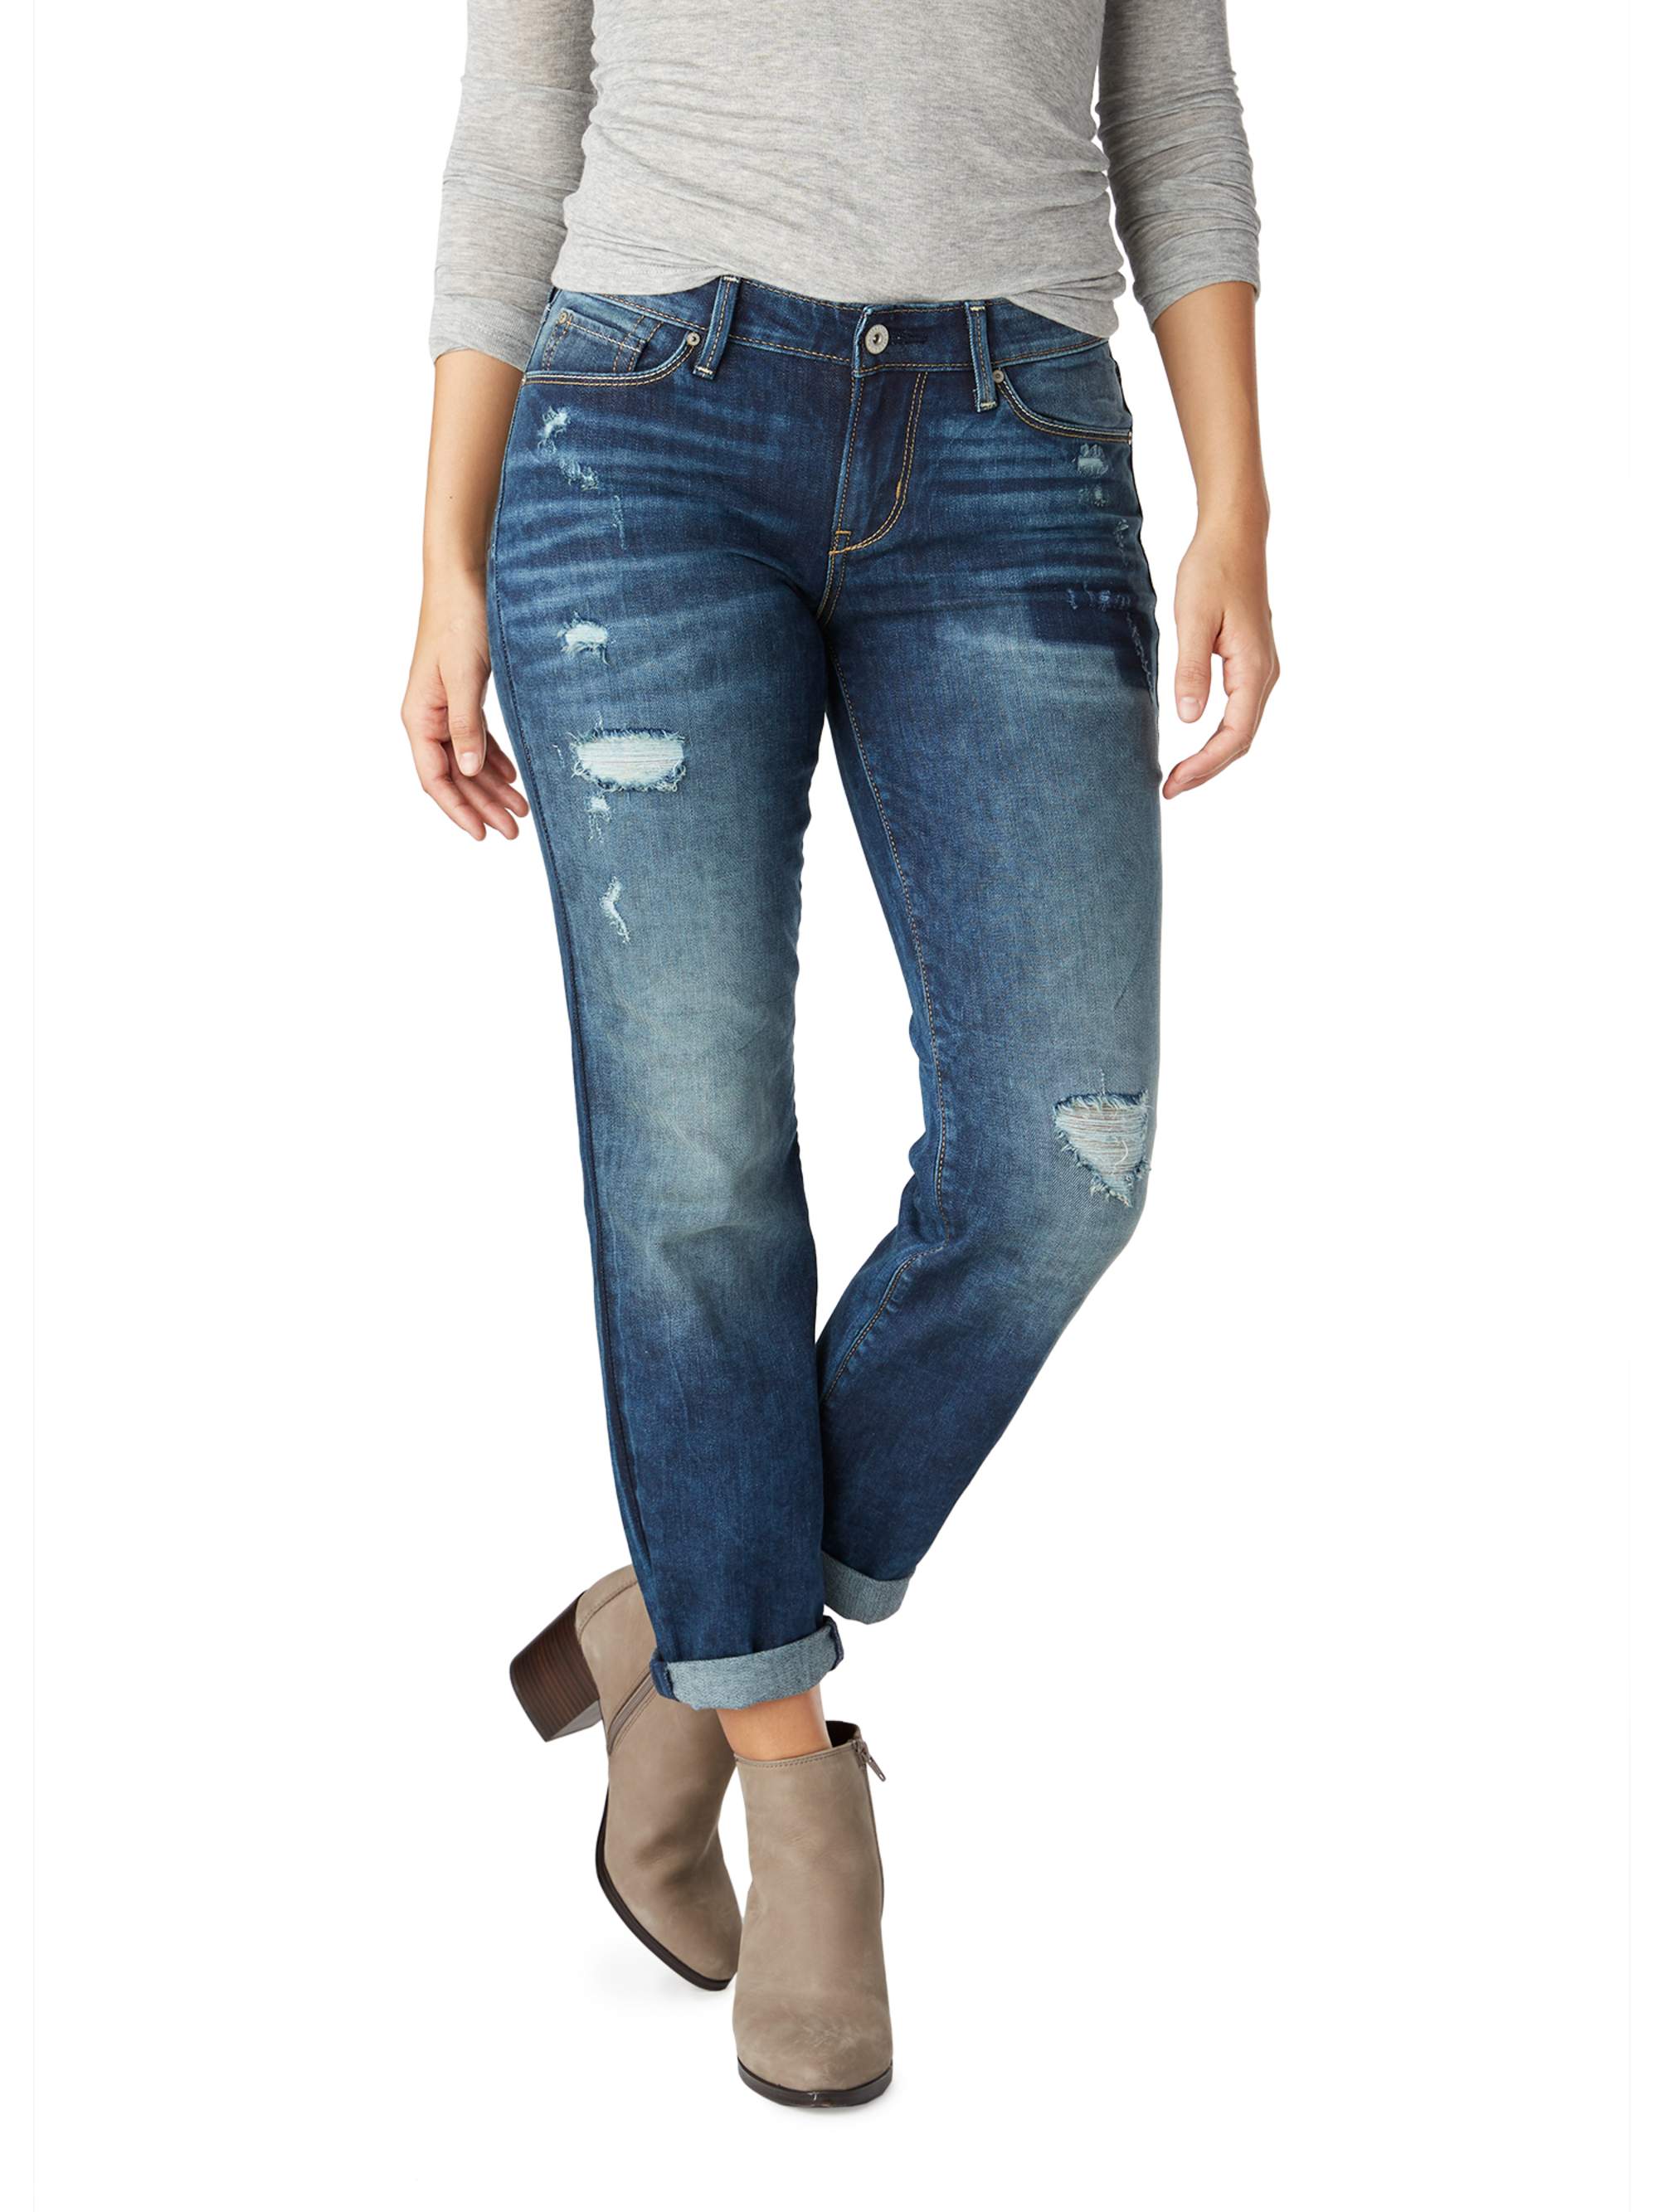 Signature by Levi Strauss & Co. Women's Modern Slim Cuffed Jeans - image 1 of 4